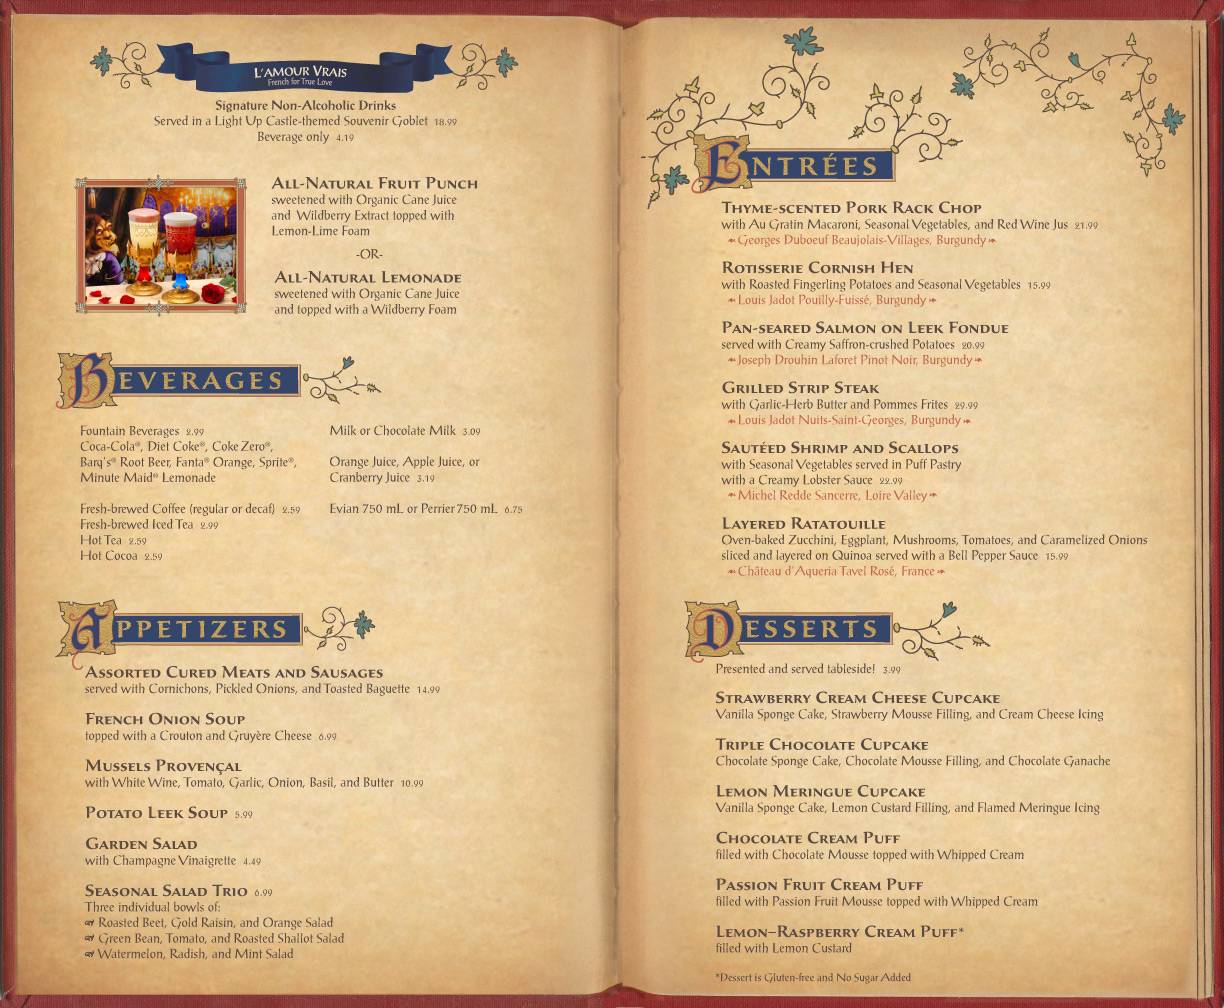 PHOTOS - A look at the finished 'Be Our Guest Restaurant' dinner menu including pricing